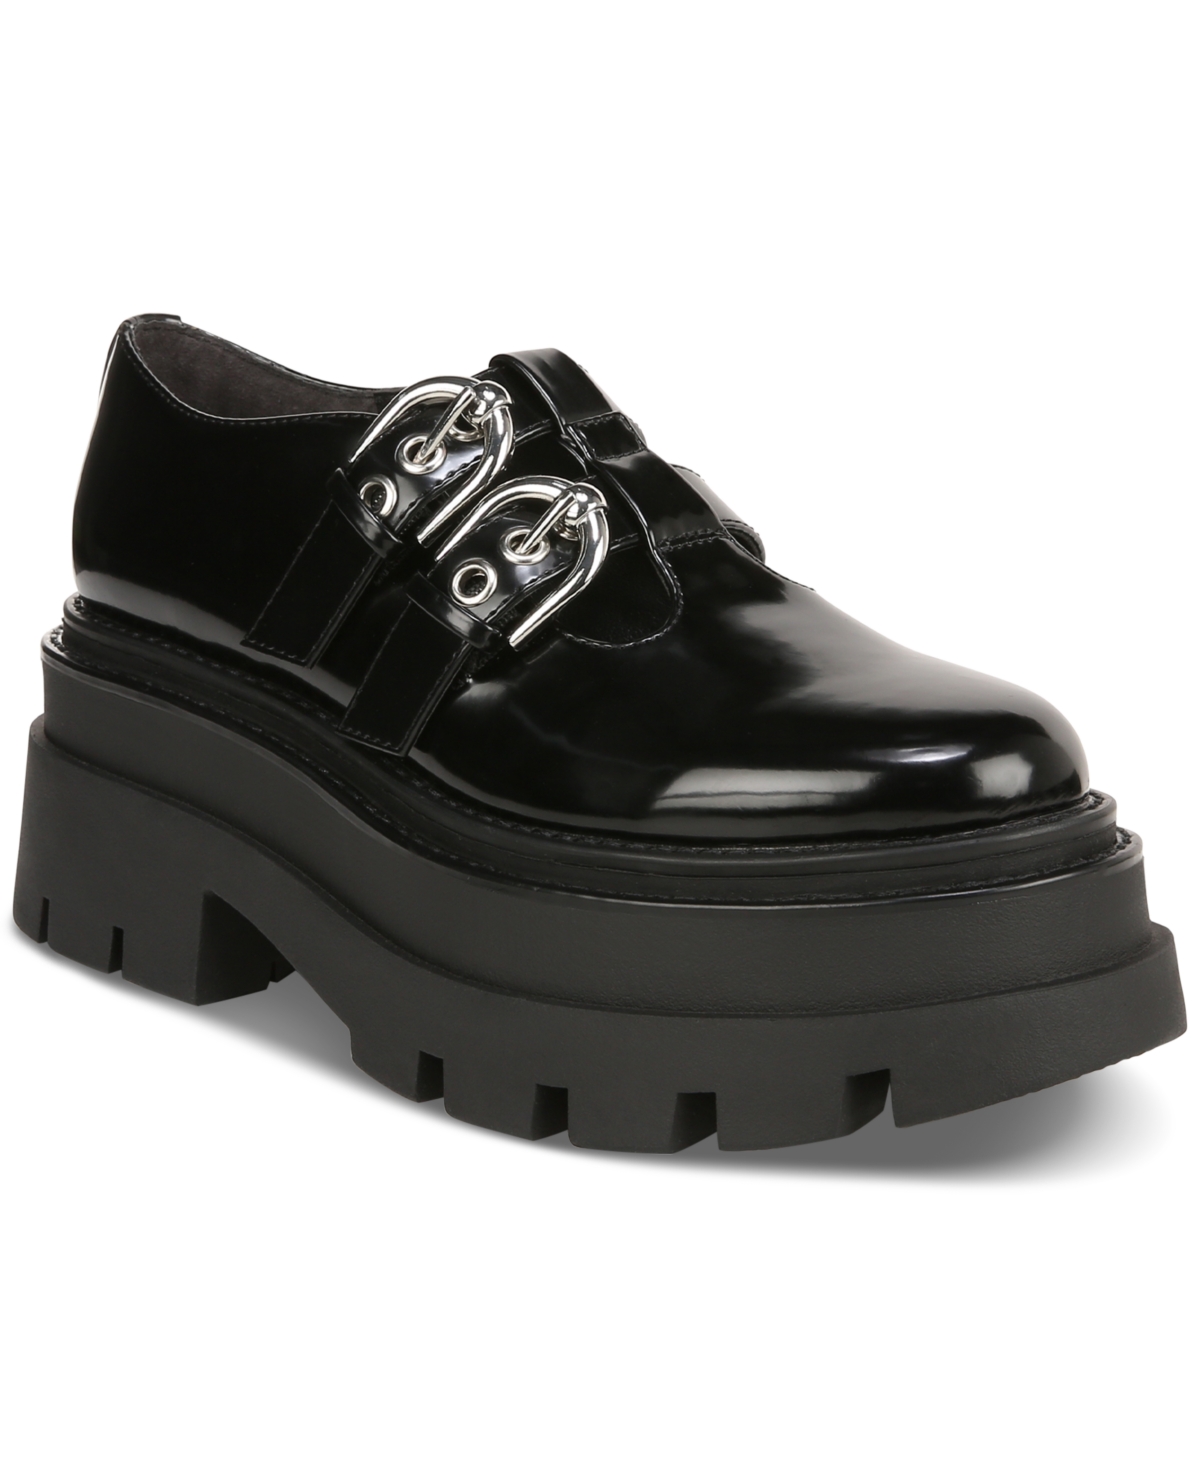 CIRCUS NY WOMEN'S BRYCE T-STRAP MARY JANE LUG PLATFORM LOAFERS